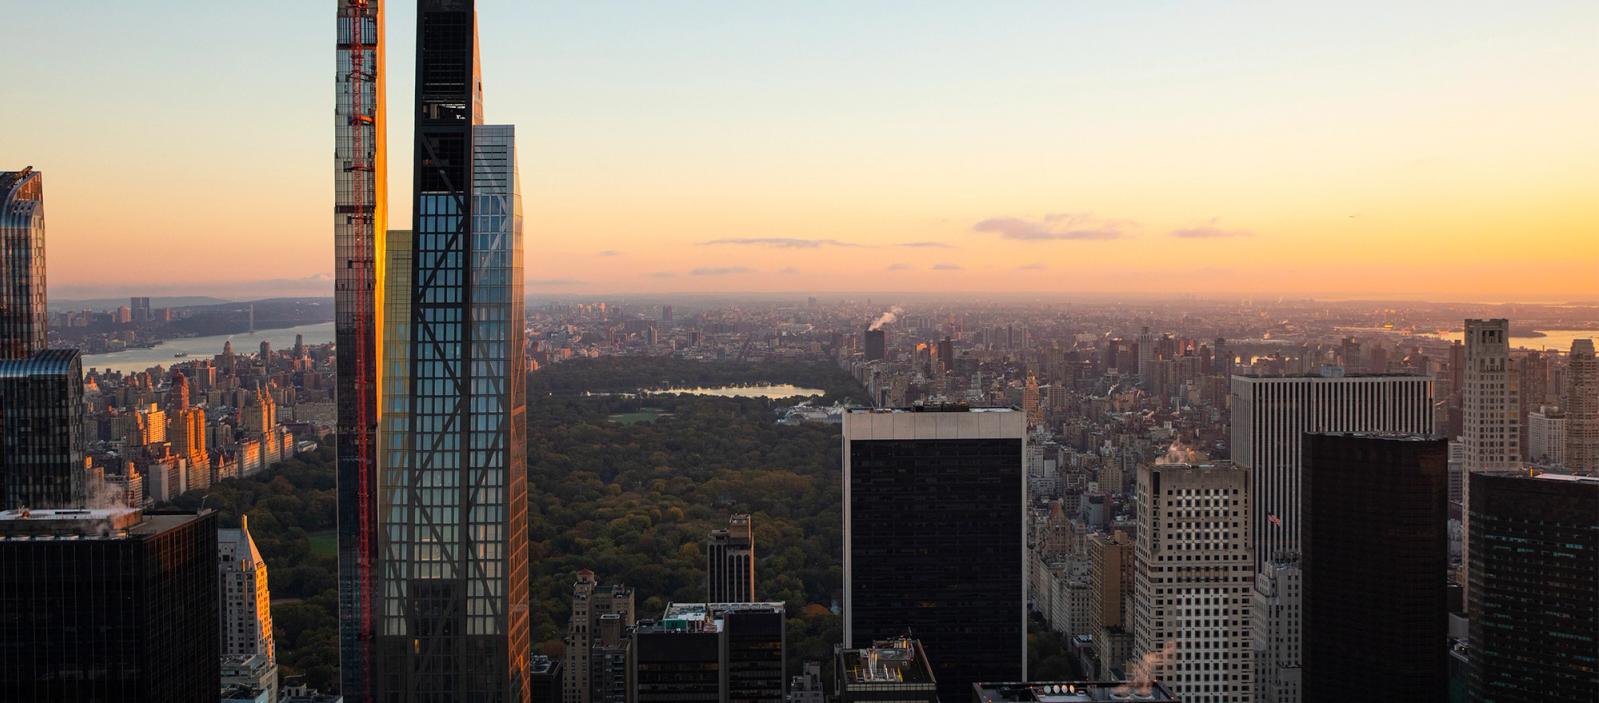 Gizele On The Go!: New York: Top Of The Rock